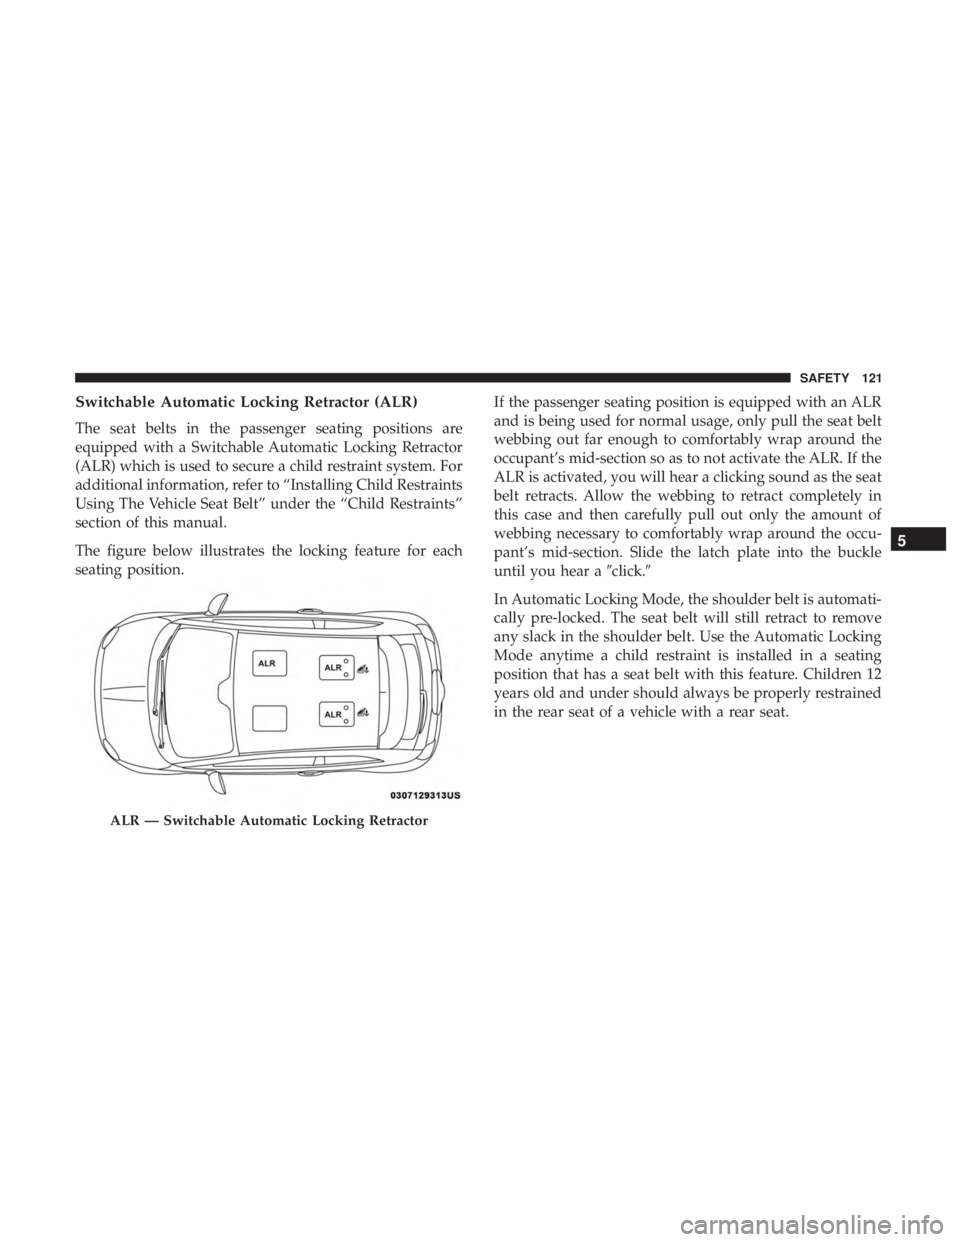 FIAT 500E 2019  Owners Manual Switchable Automatic Locking Retractor (ALR)
The seat belts in the passenger seating positions are
equipped with a Switchable Automatic Locking Retractor
(ALR) which is used to secure a child restrain